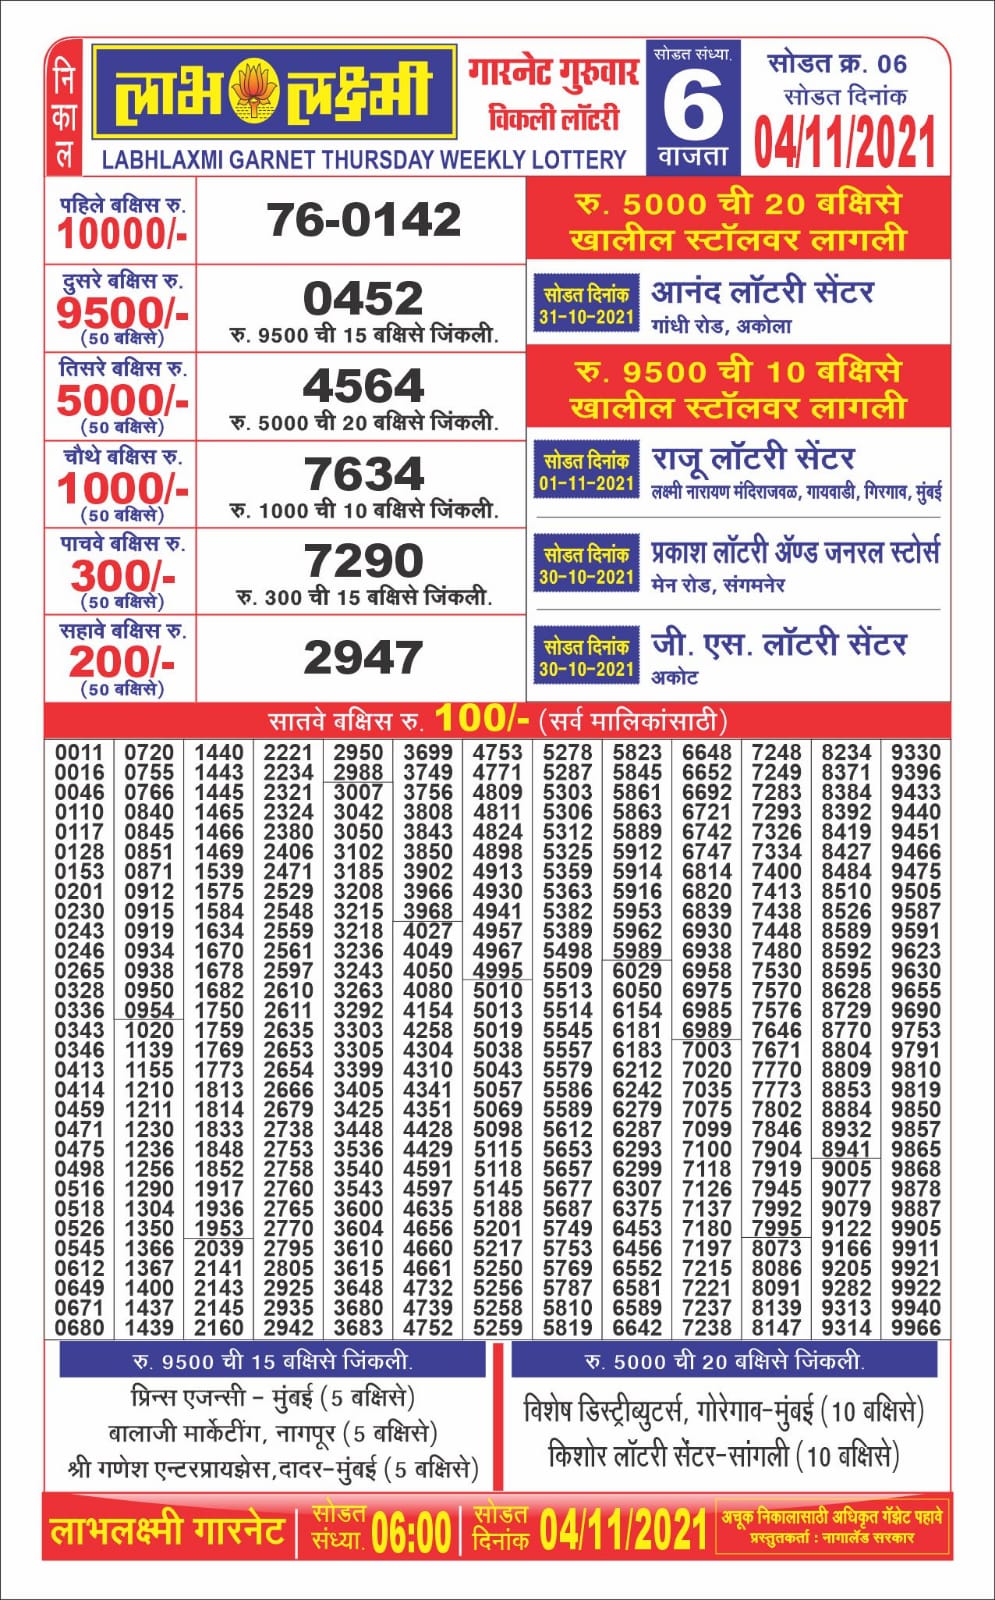 Labhlaxmi 6pm Lottery Result 04.11.2021